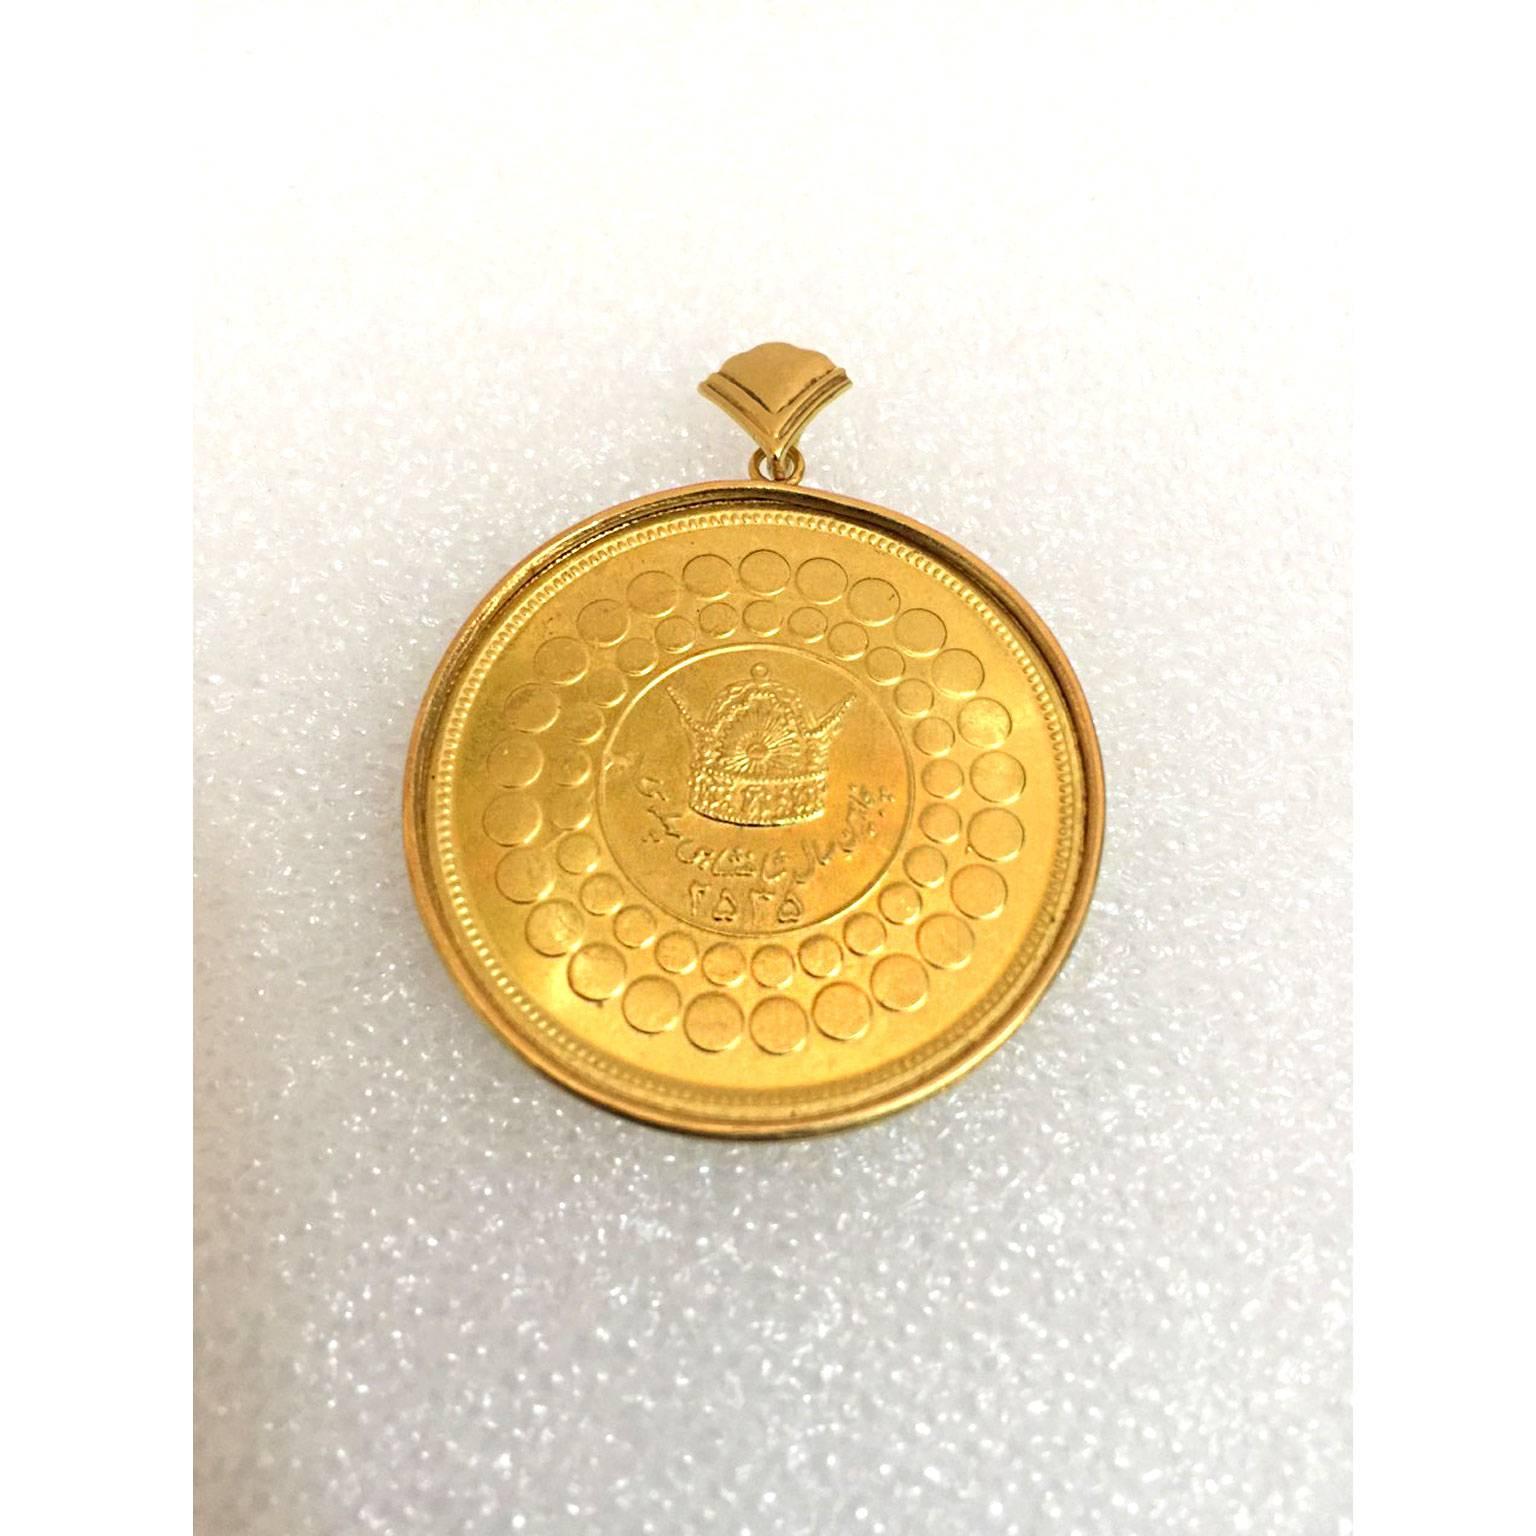 A rare 22K Gold Medal with the ring for the 50th anniversary of the Pahlavi Kingdom. Profile picture of Mohammad Reza Shah and Reza Shah (Persian Kings).  Approx. 40g